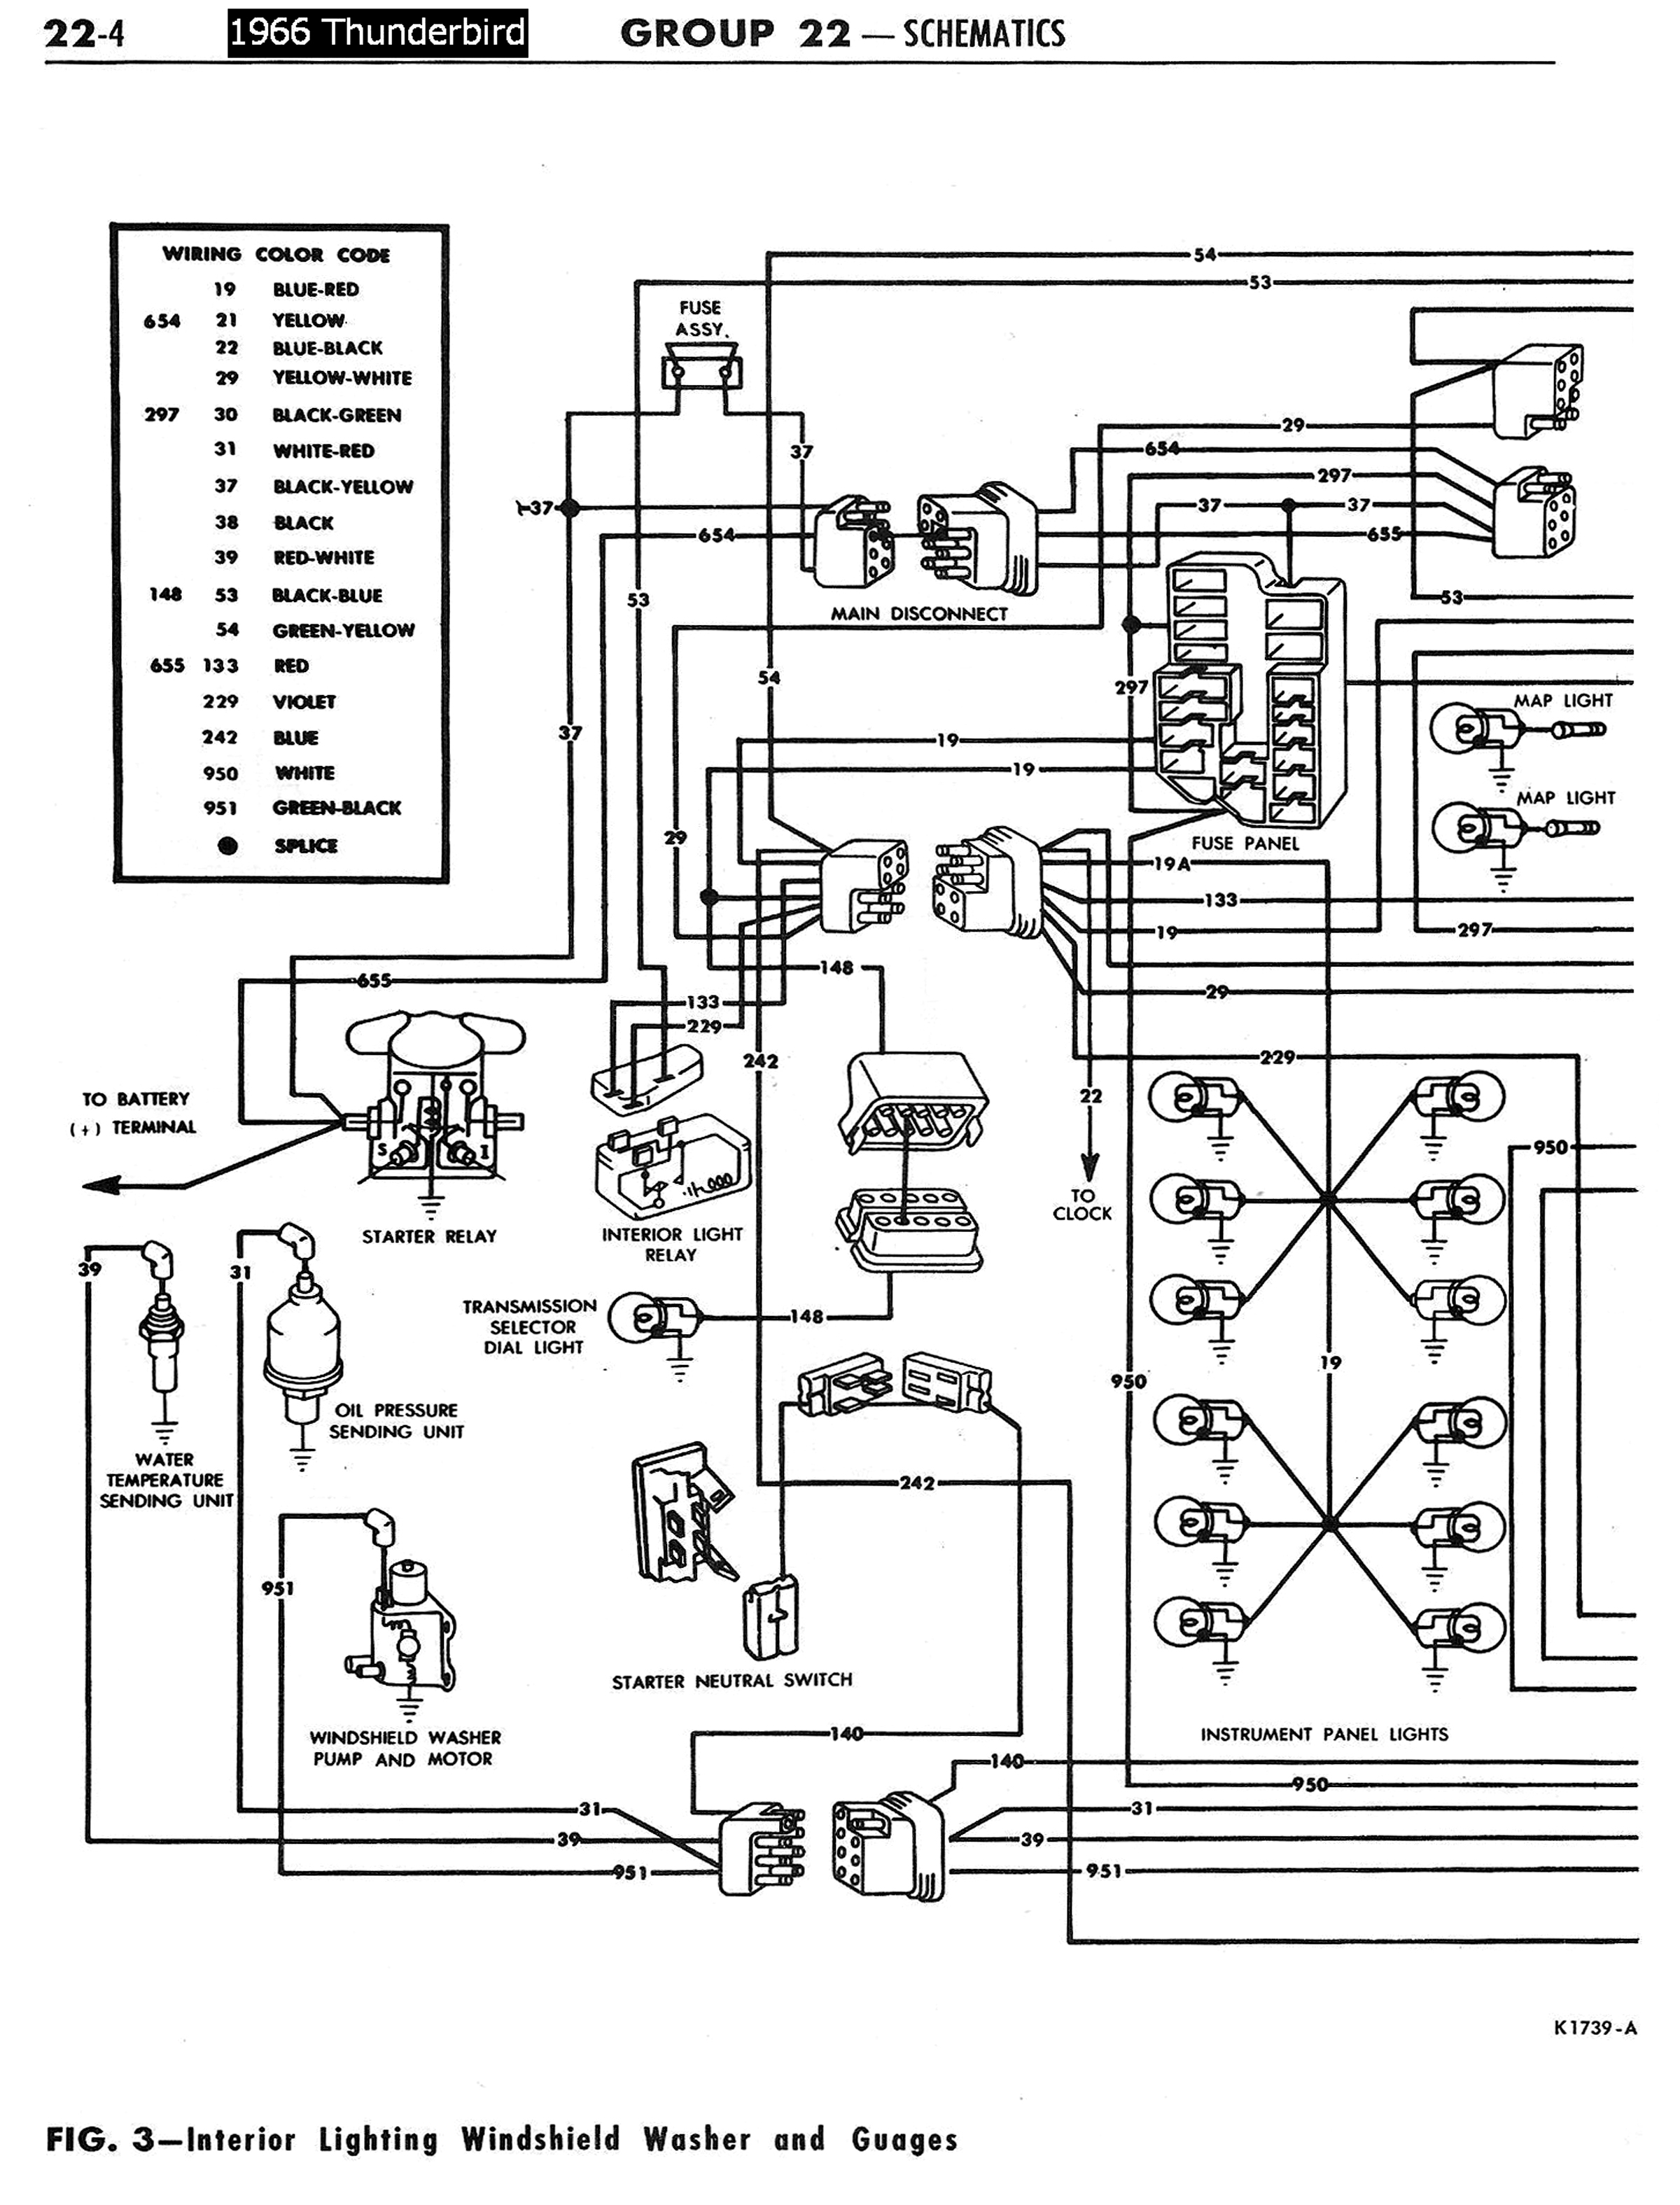 1964 ford thunderbird wiring diagram for brake and taillights